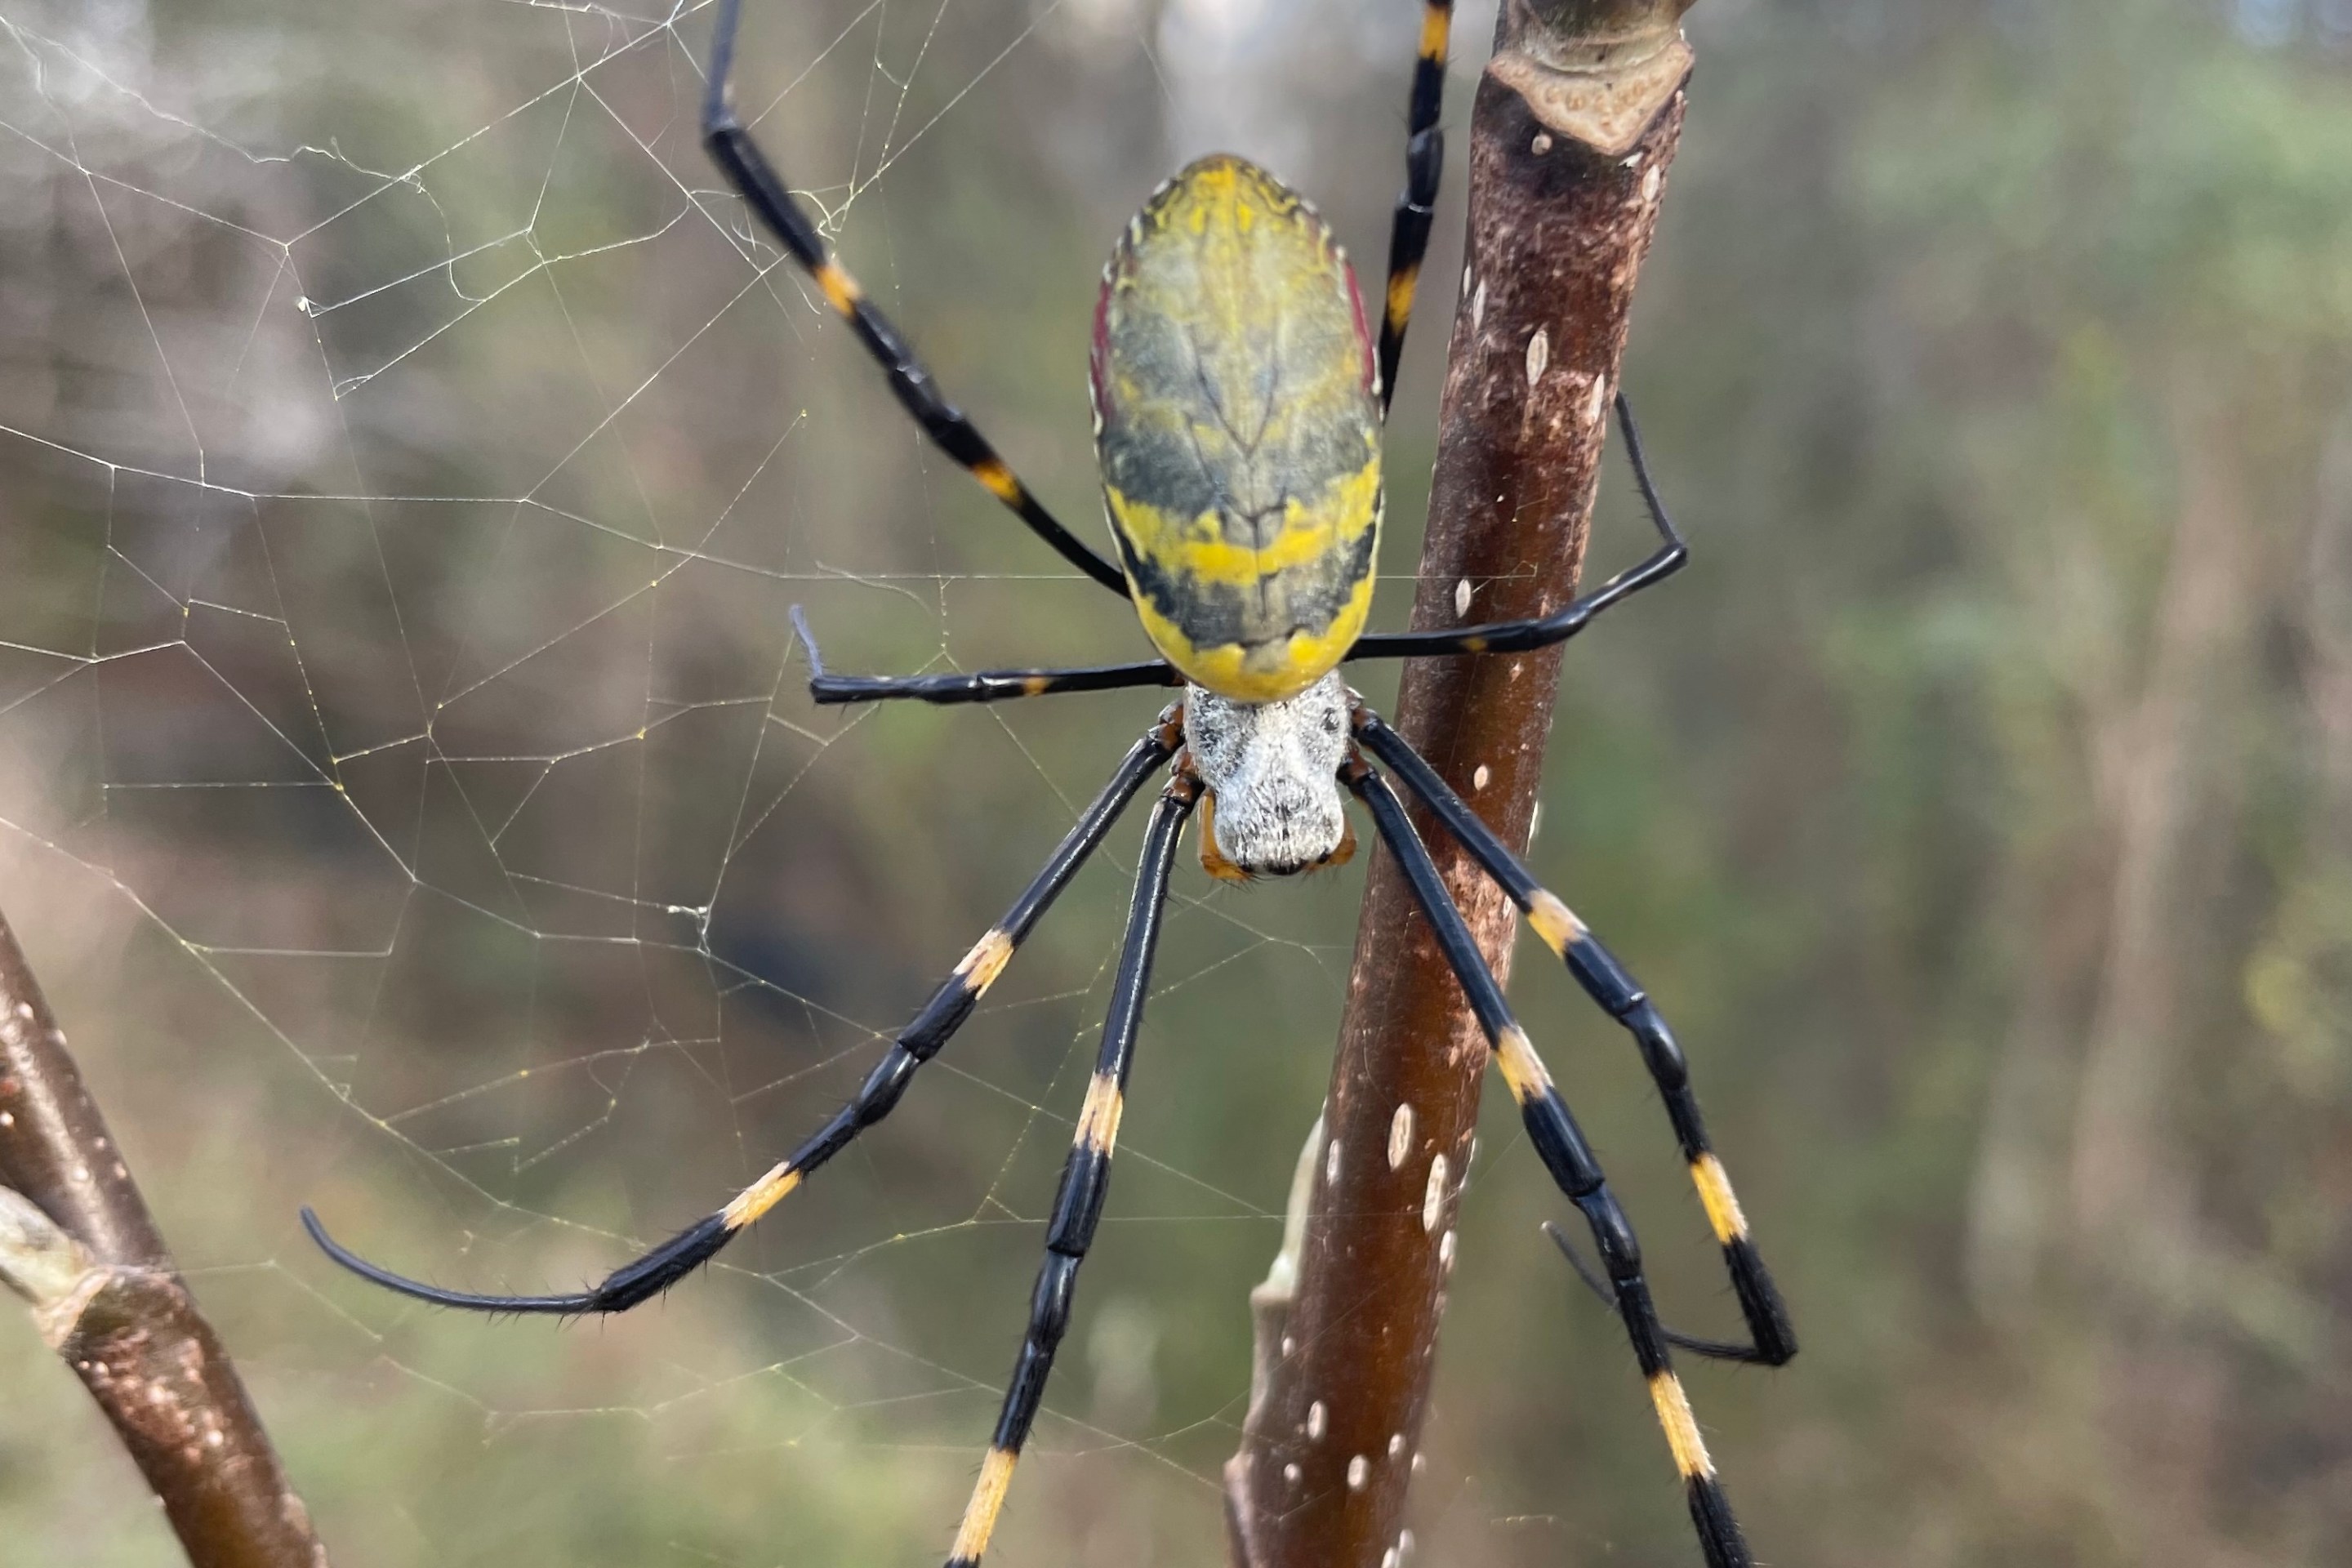 a yellow and blue striped joro spider in a web